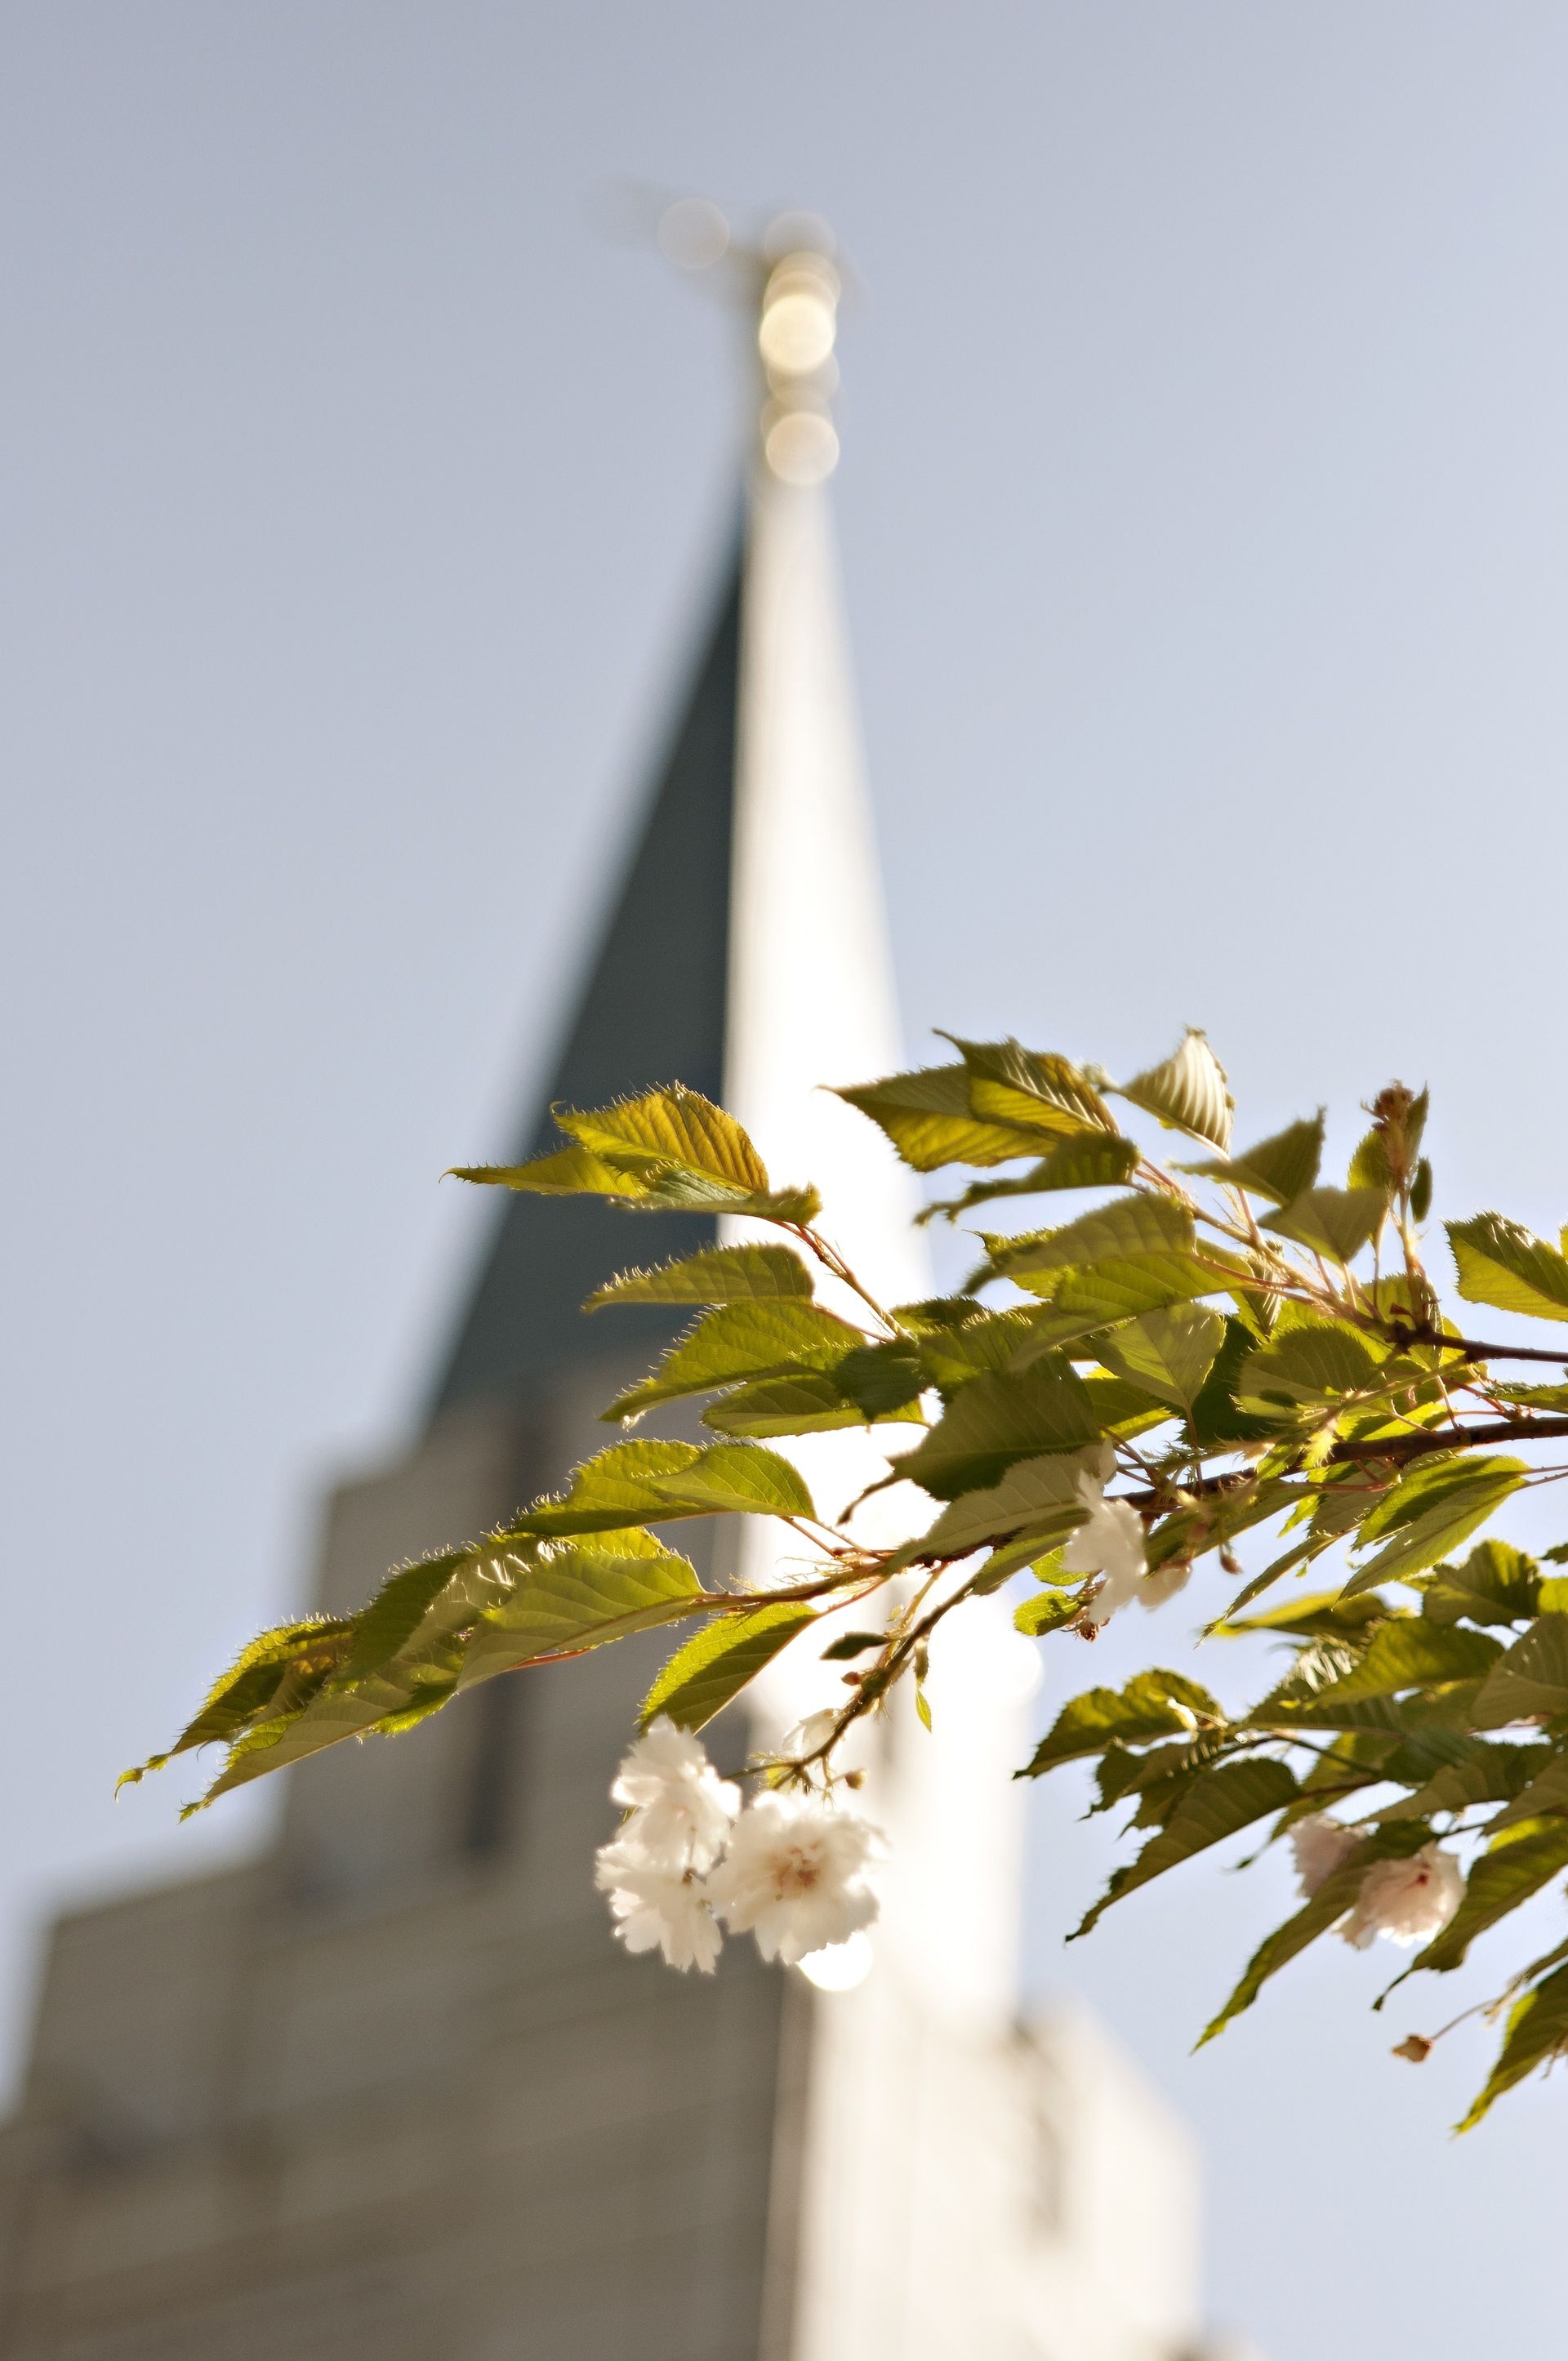 The Vancouver British Columbia Temple spire, with scenery.